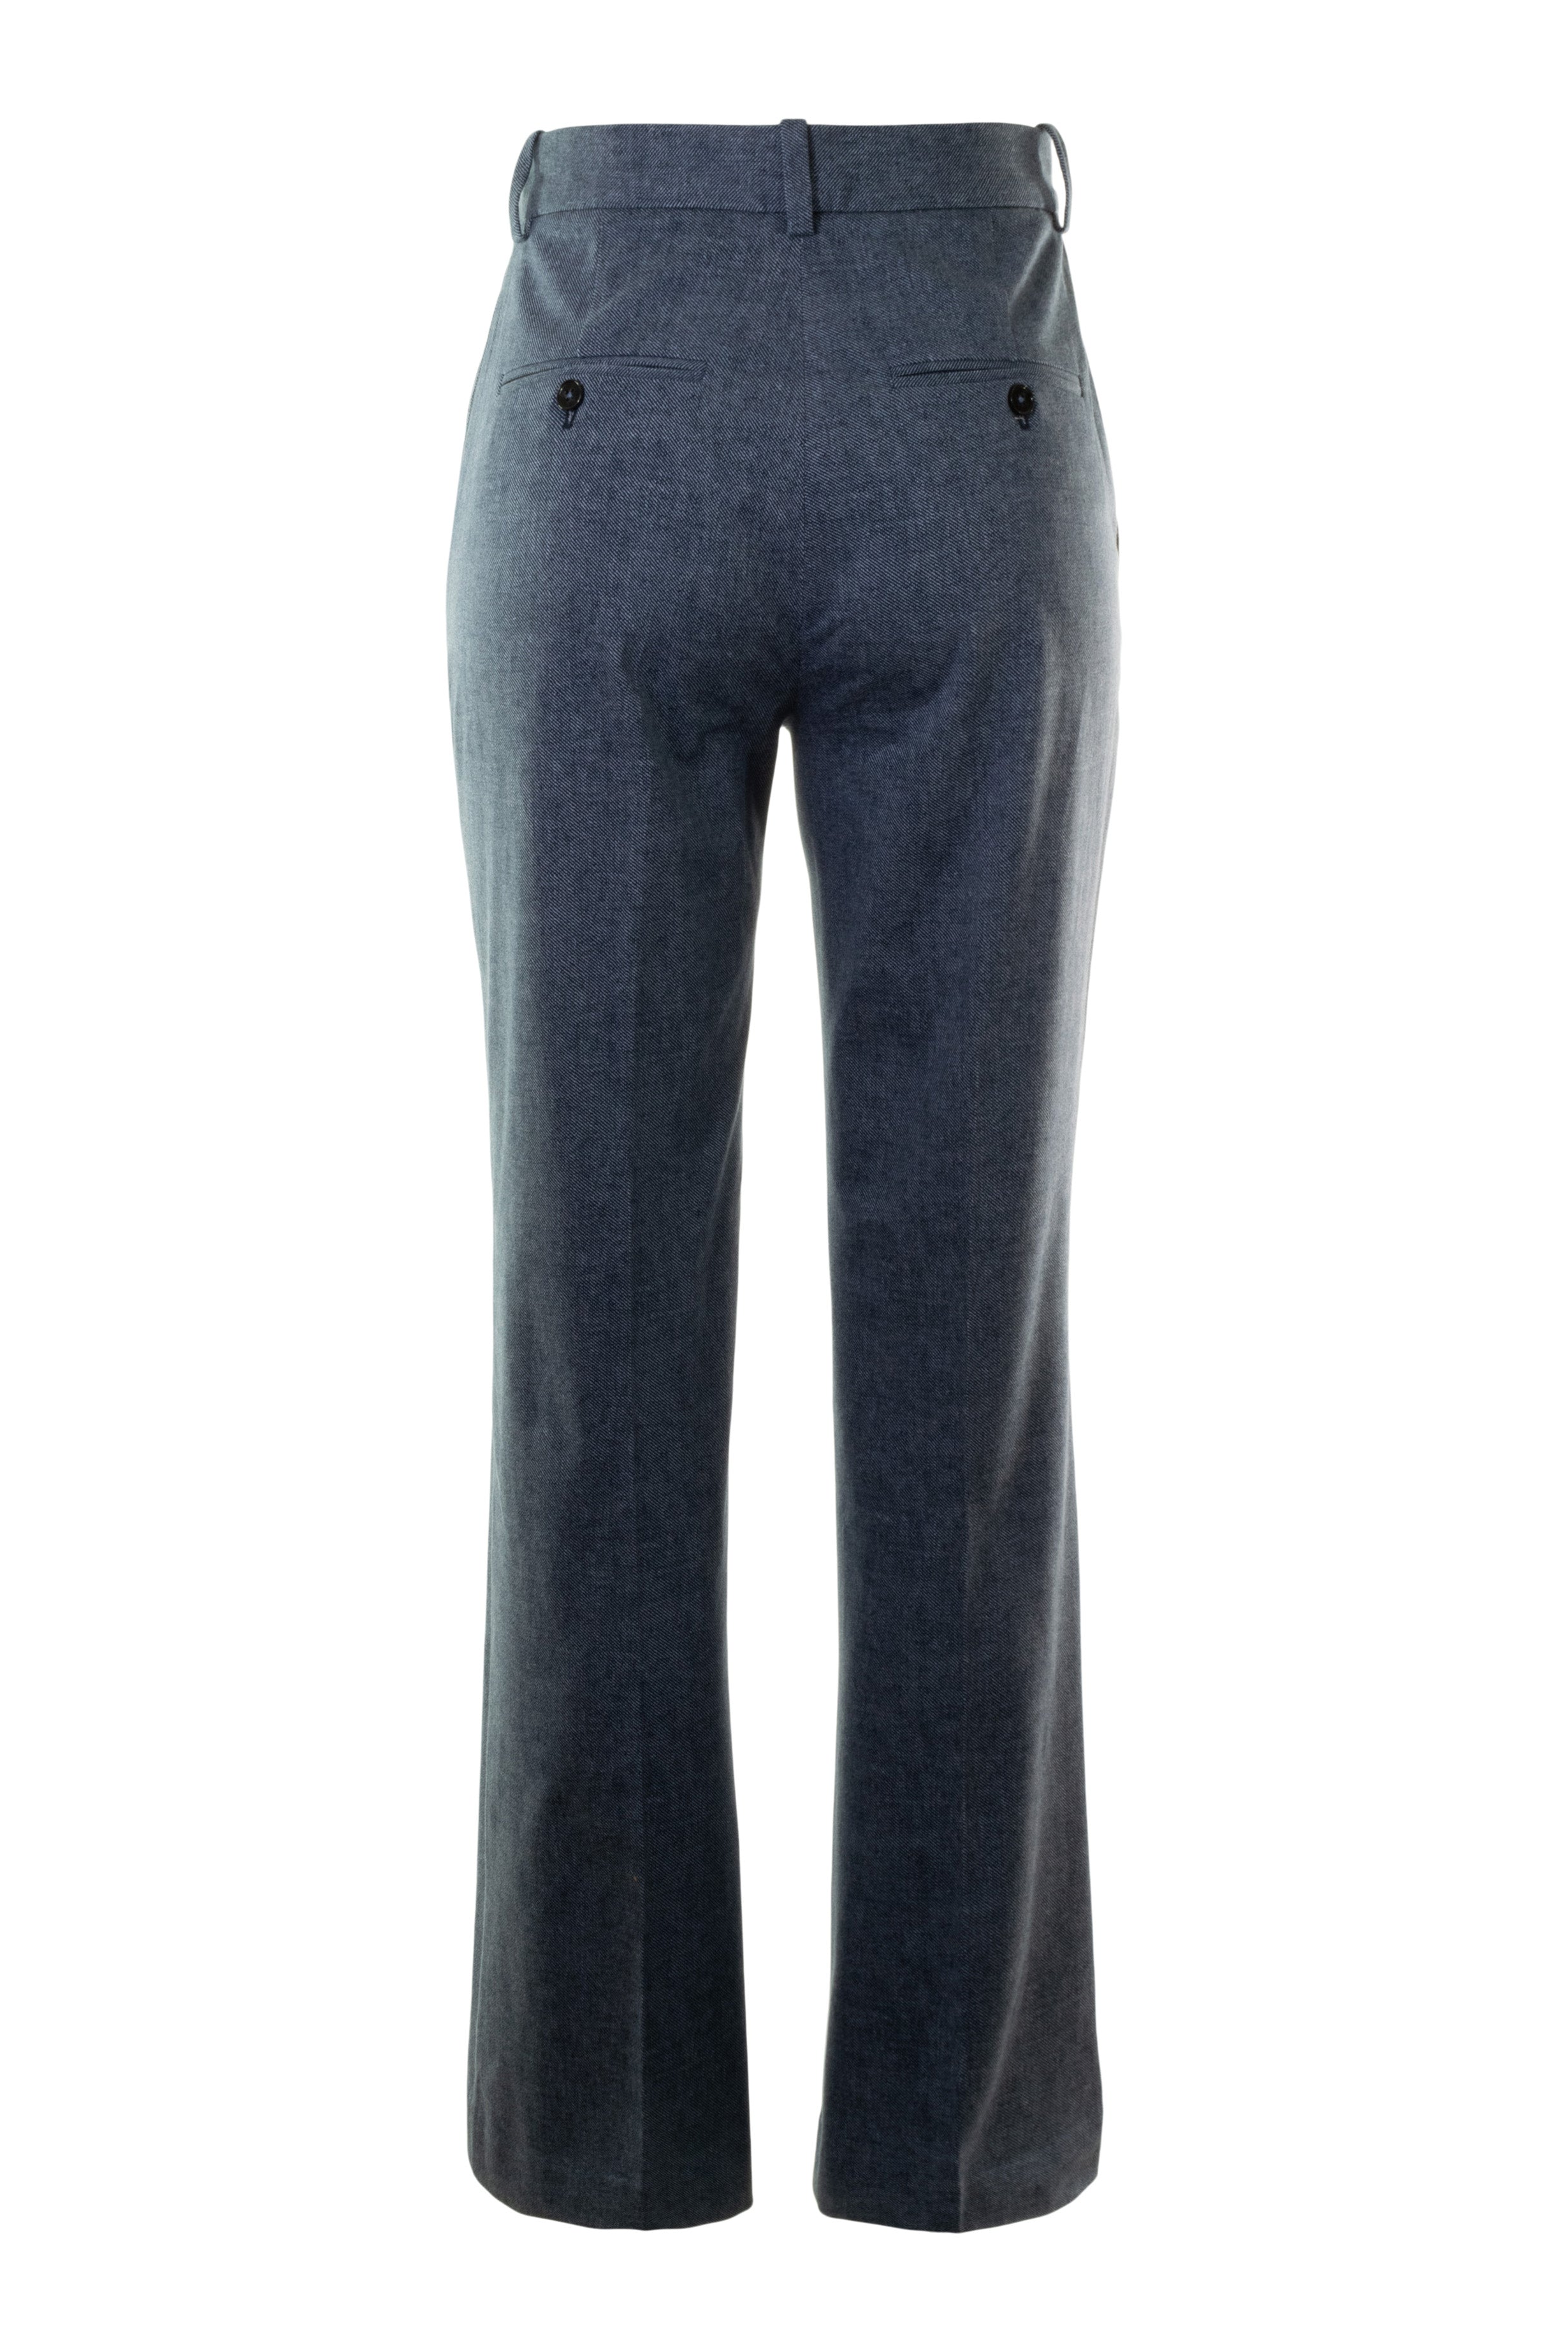 Circolo 1901 Jersey Pants in Indaco